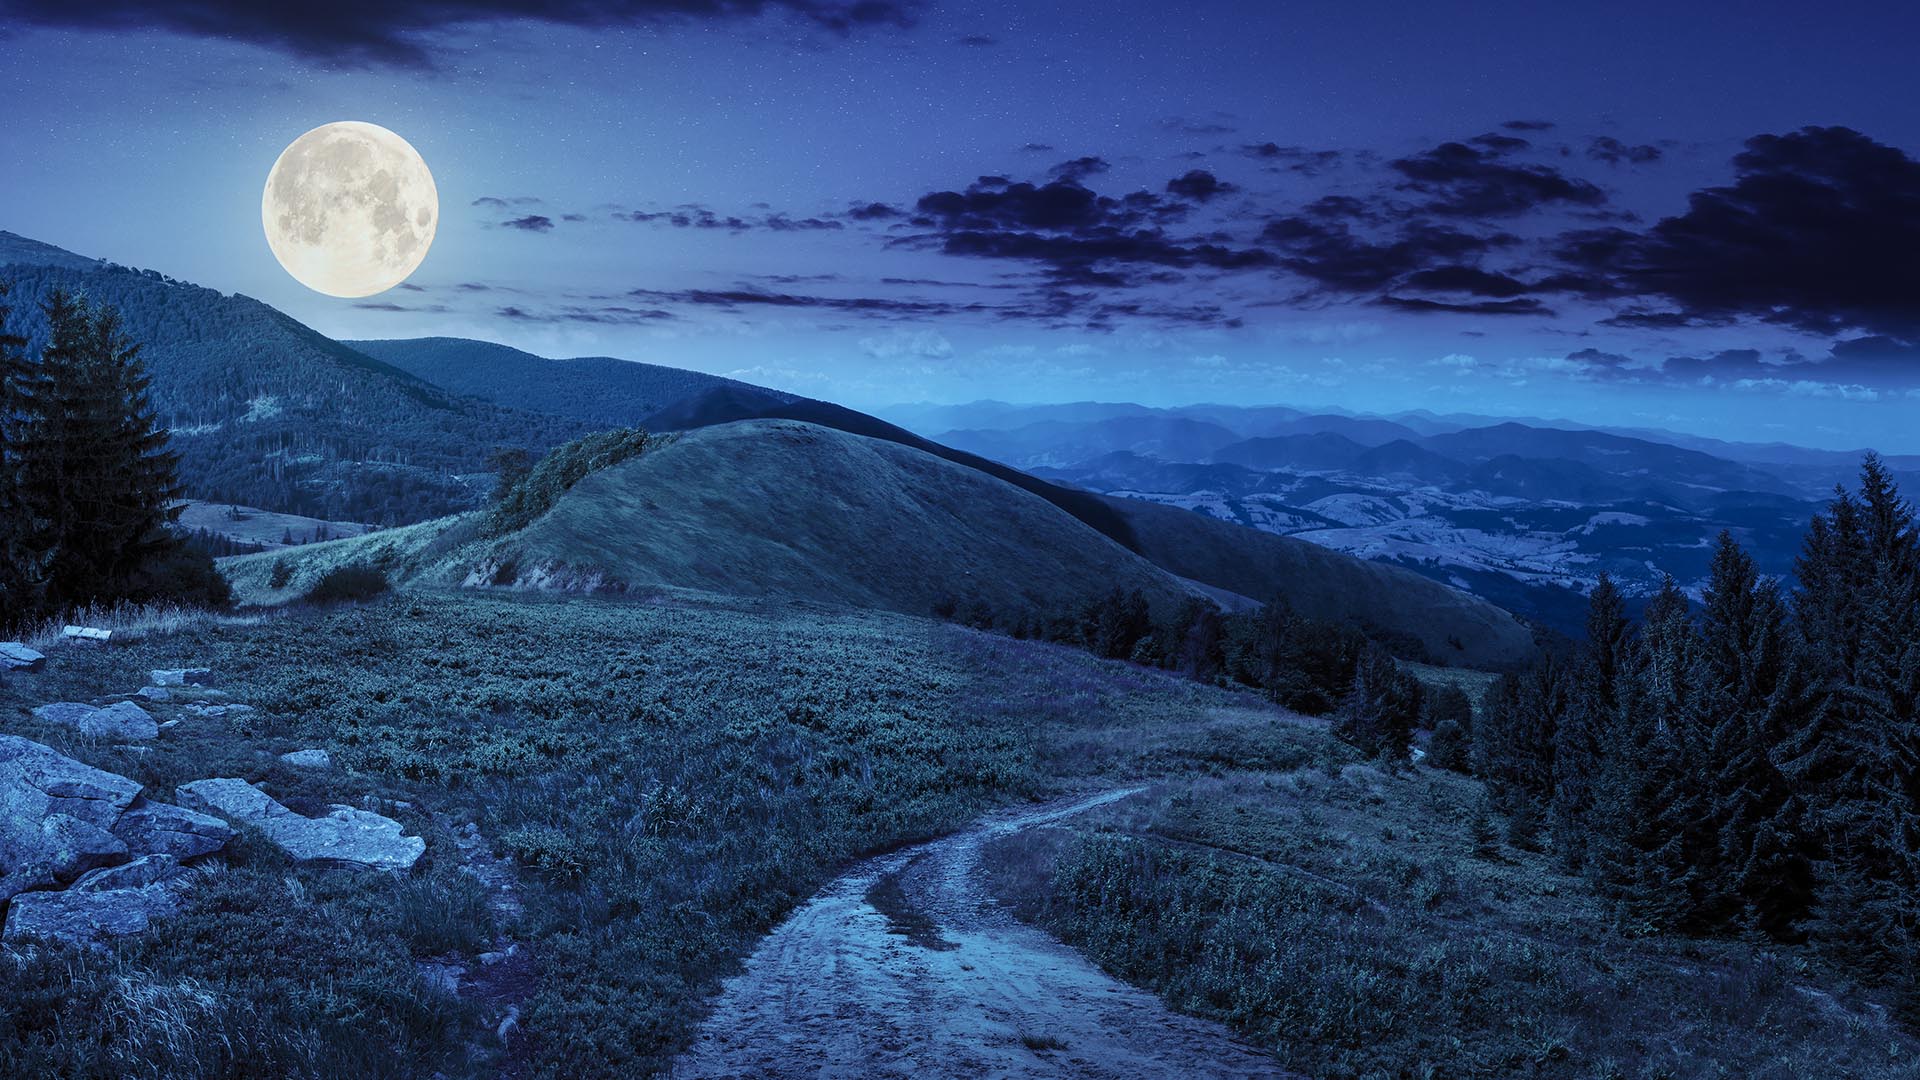 Full moon, mountains at nighttime